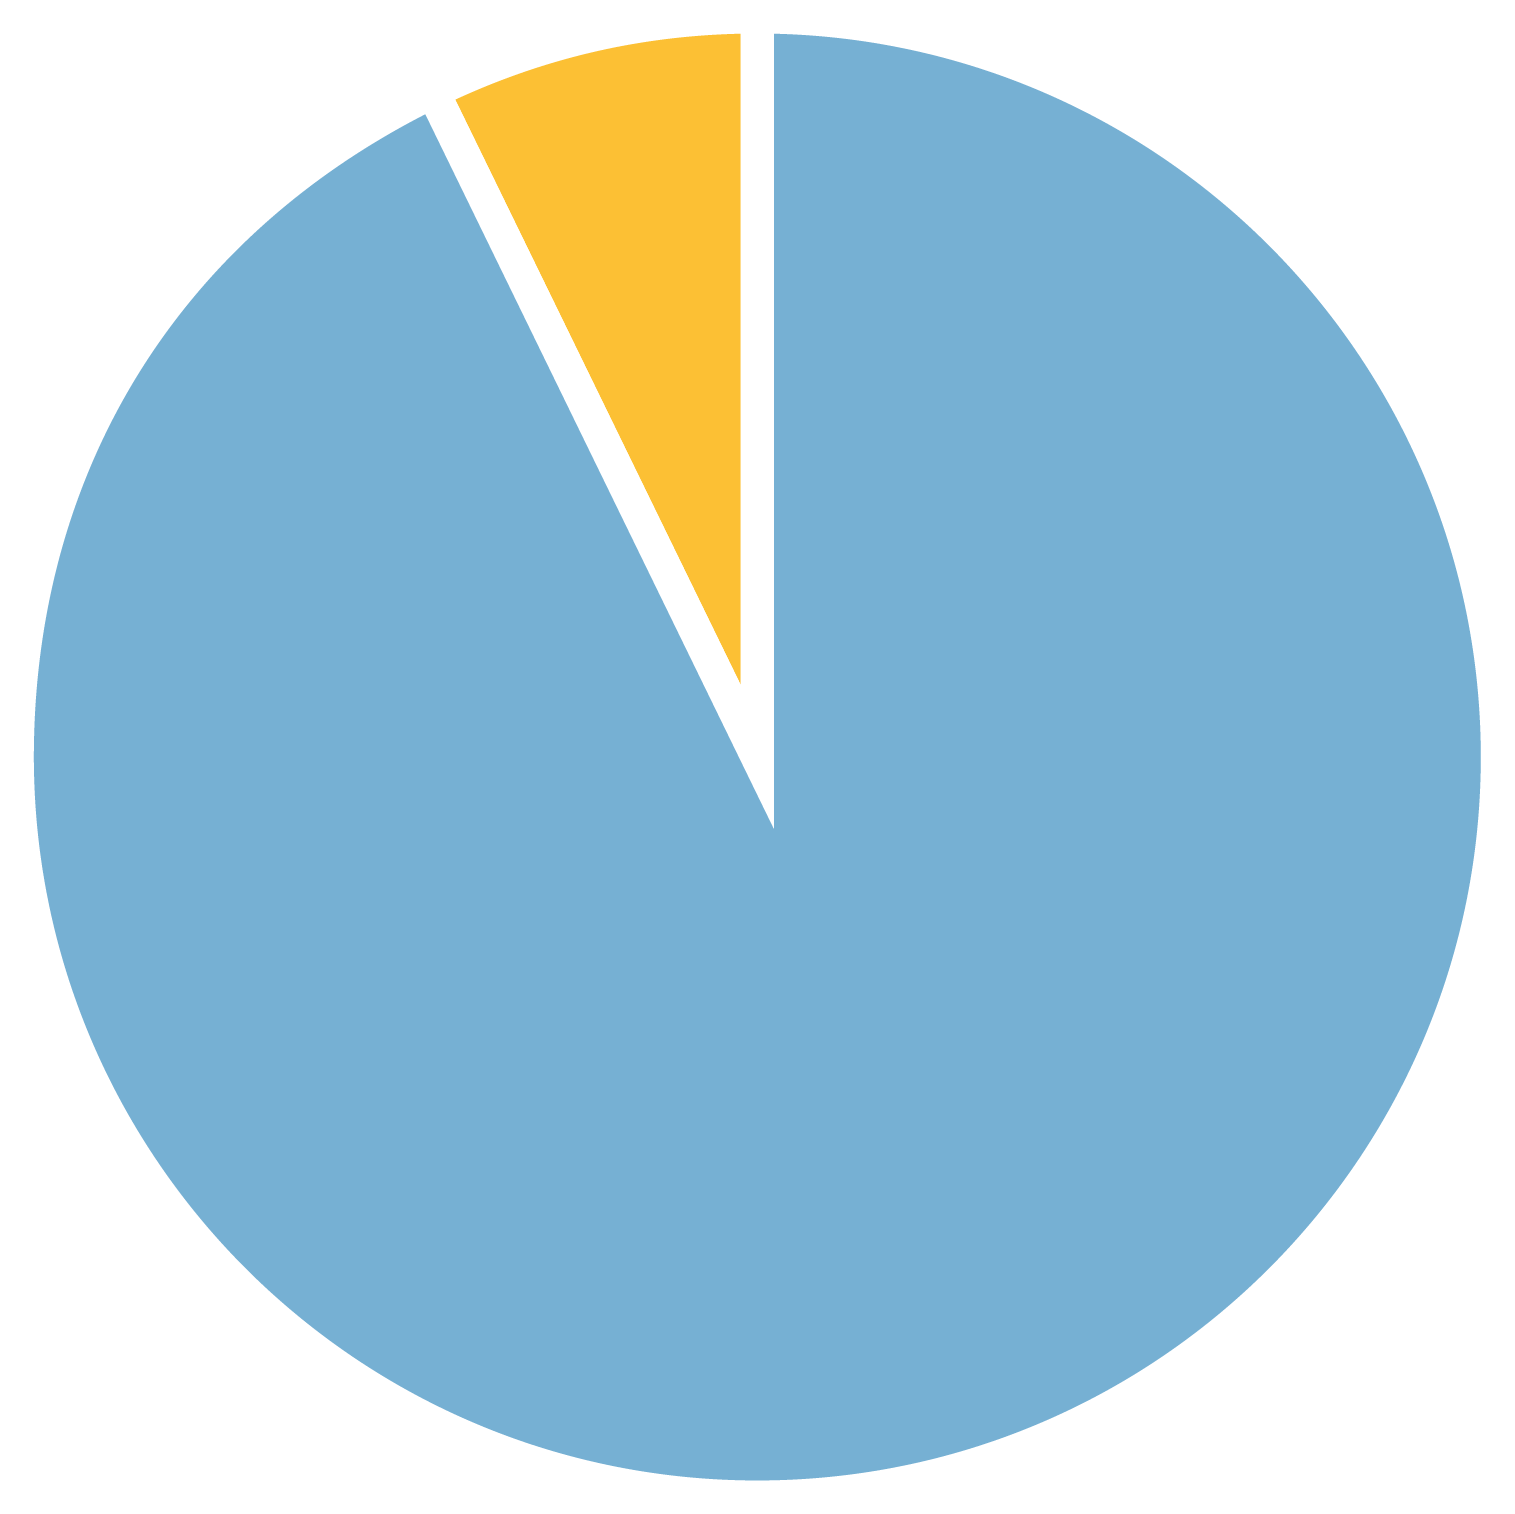 Pie chart displaying the percent distribution of females who had a co-diagnosis of autism. Females without autism: 62%. Females with autism: 38%.